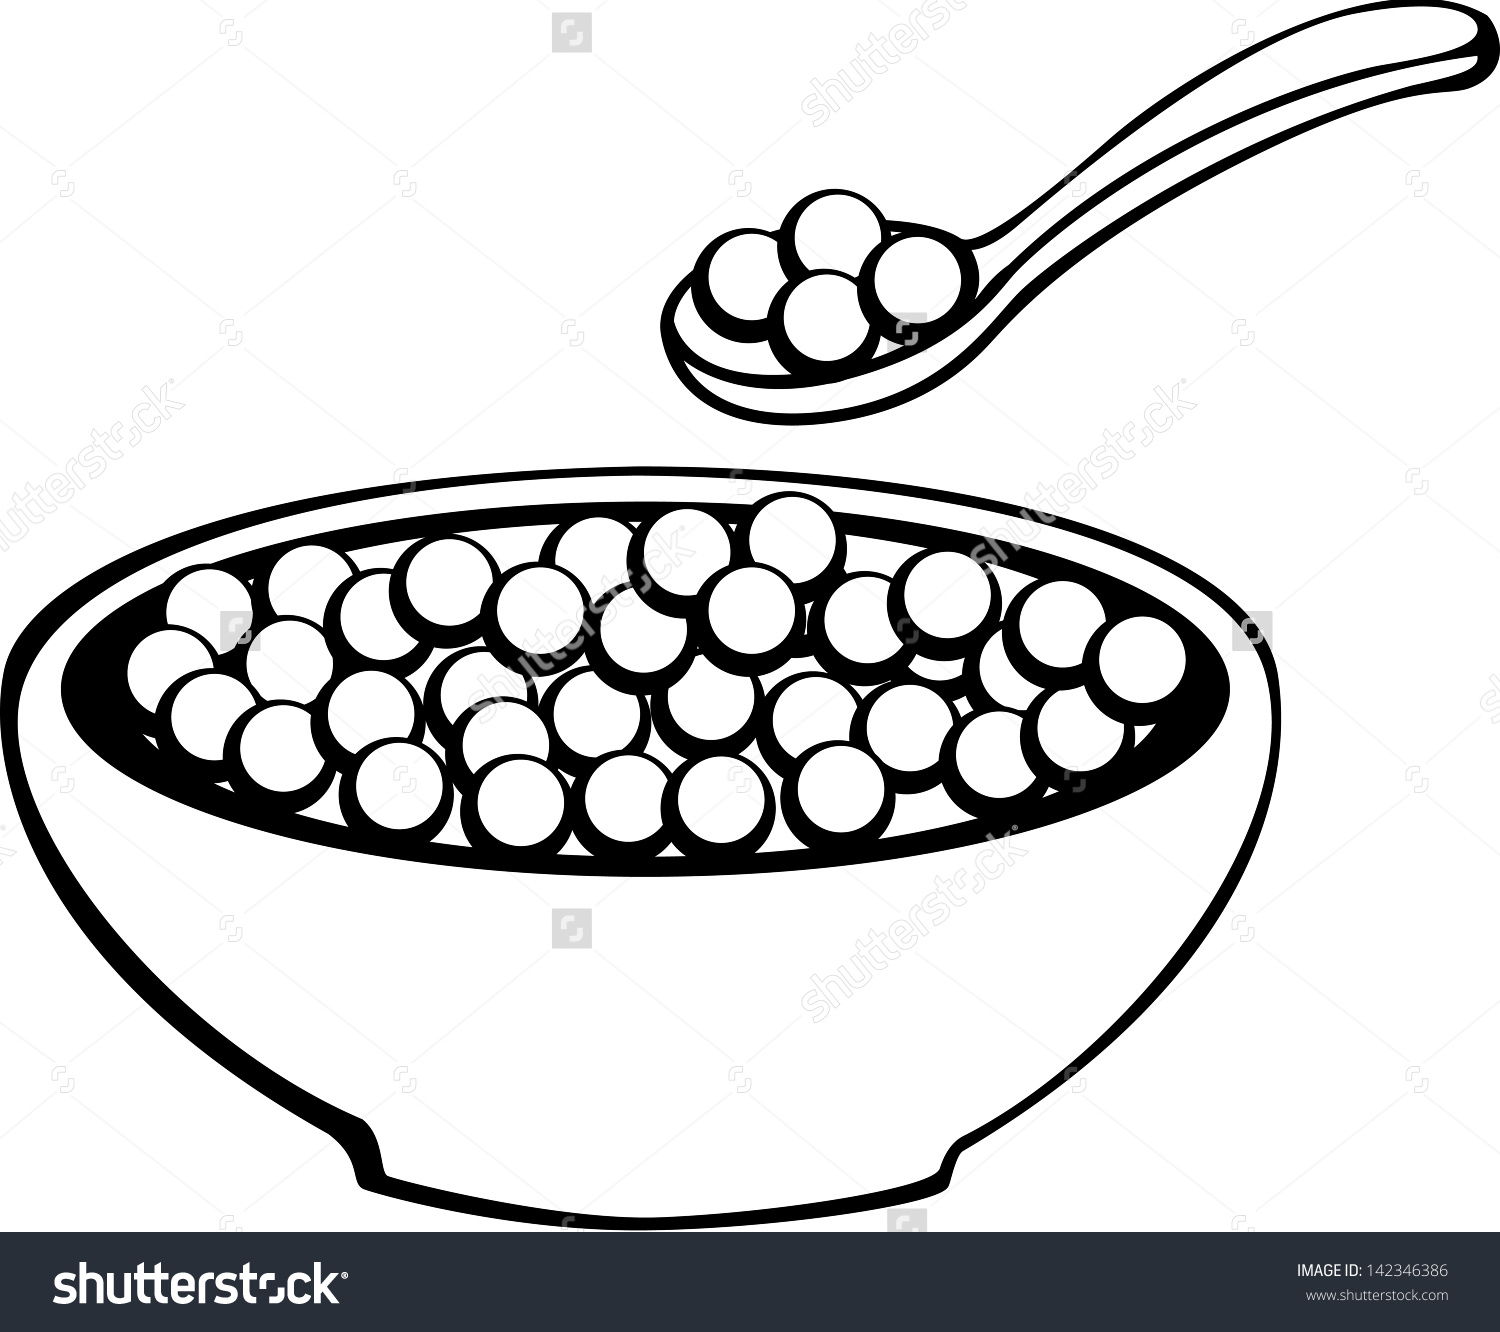 Cartoon Cereal Images Picture